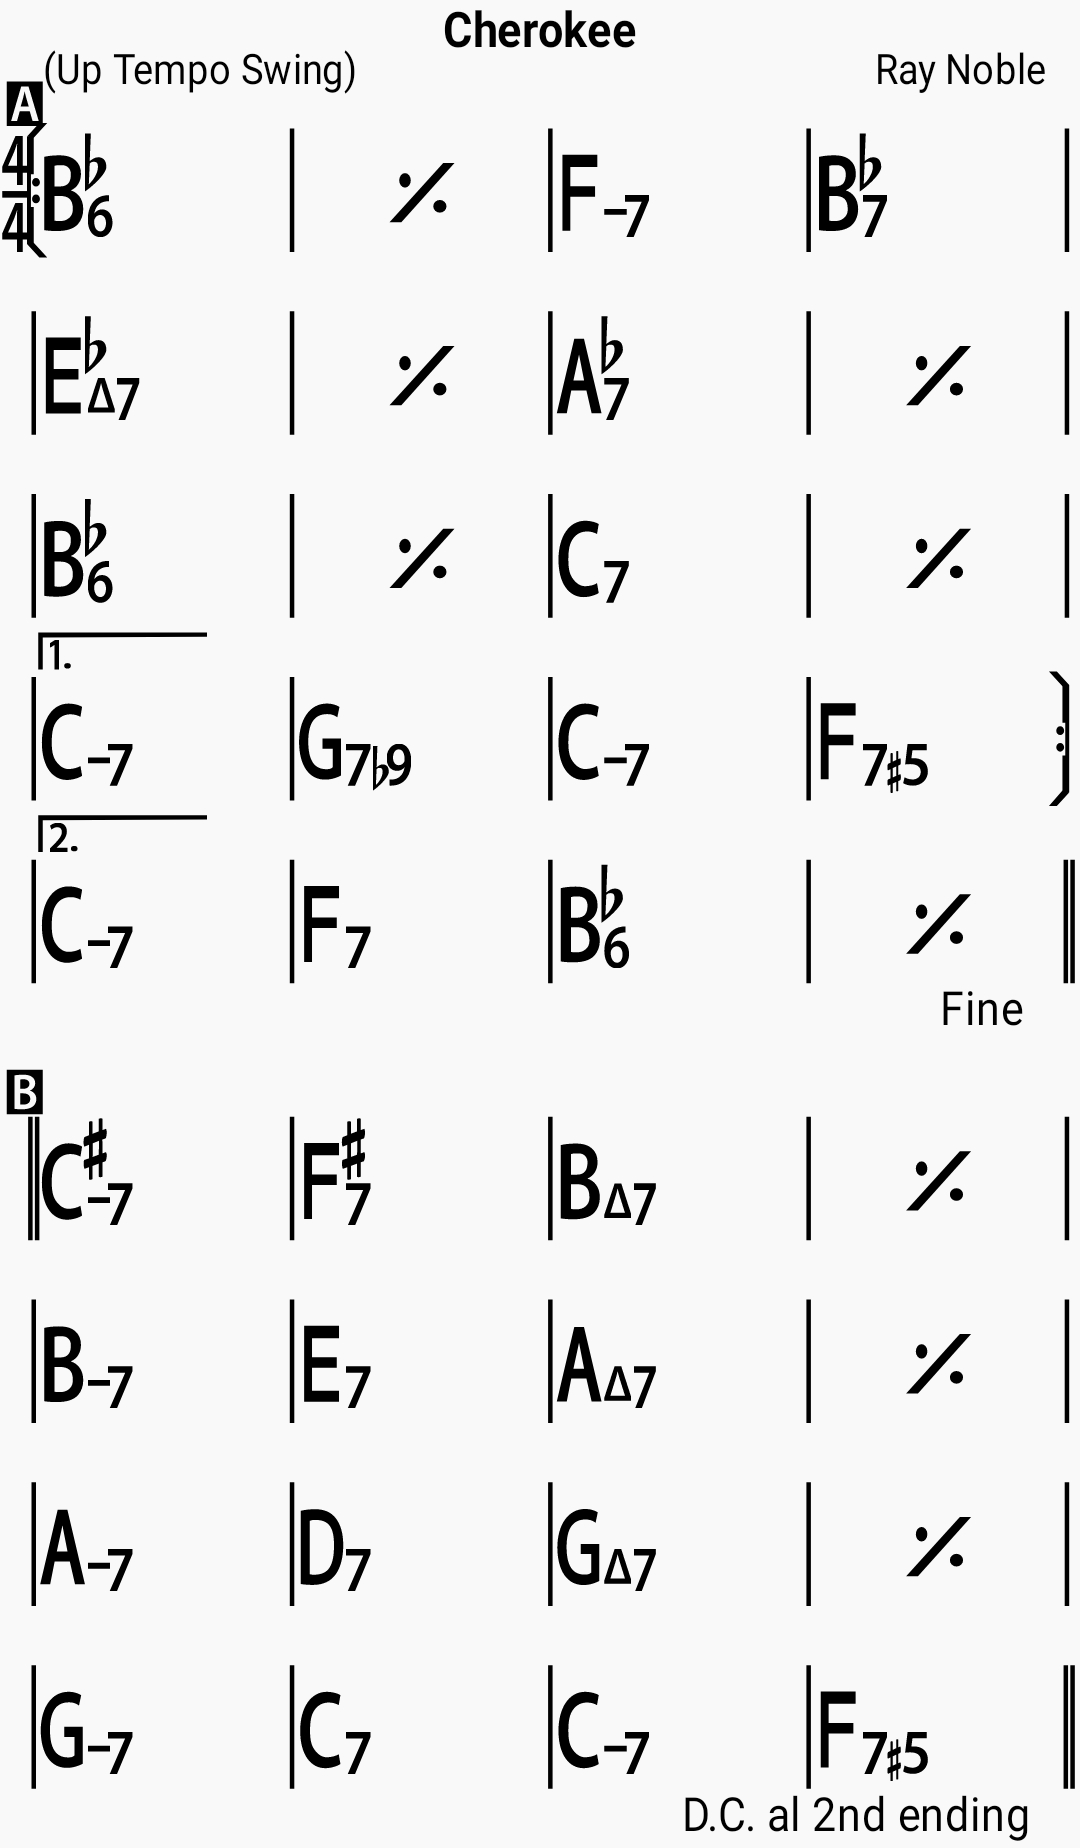 Chord chart for the jazz standard Cherokee